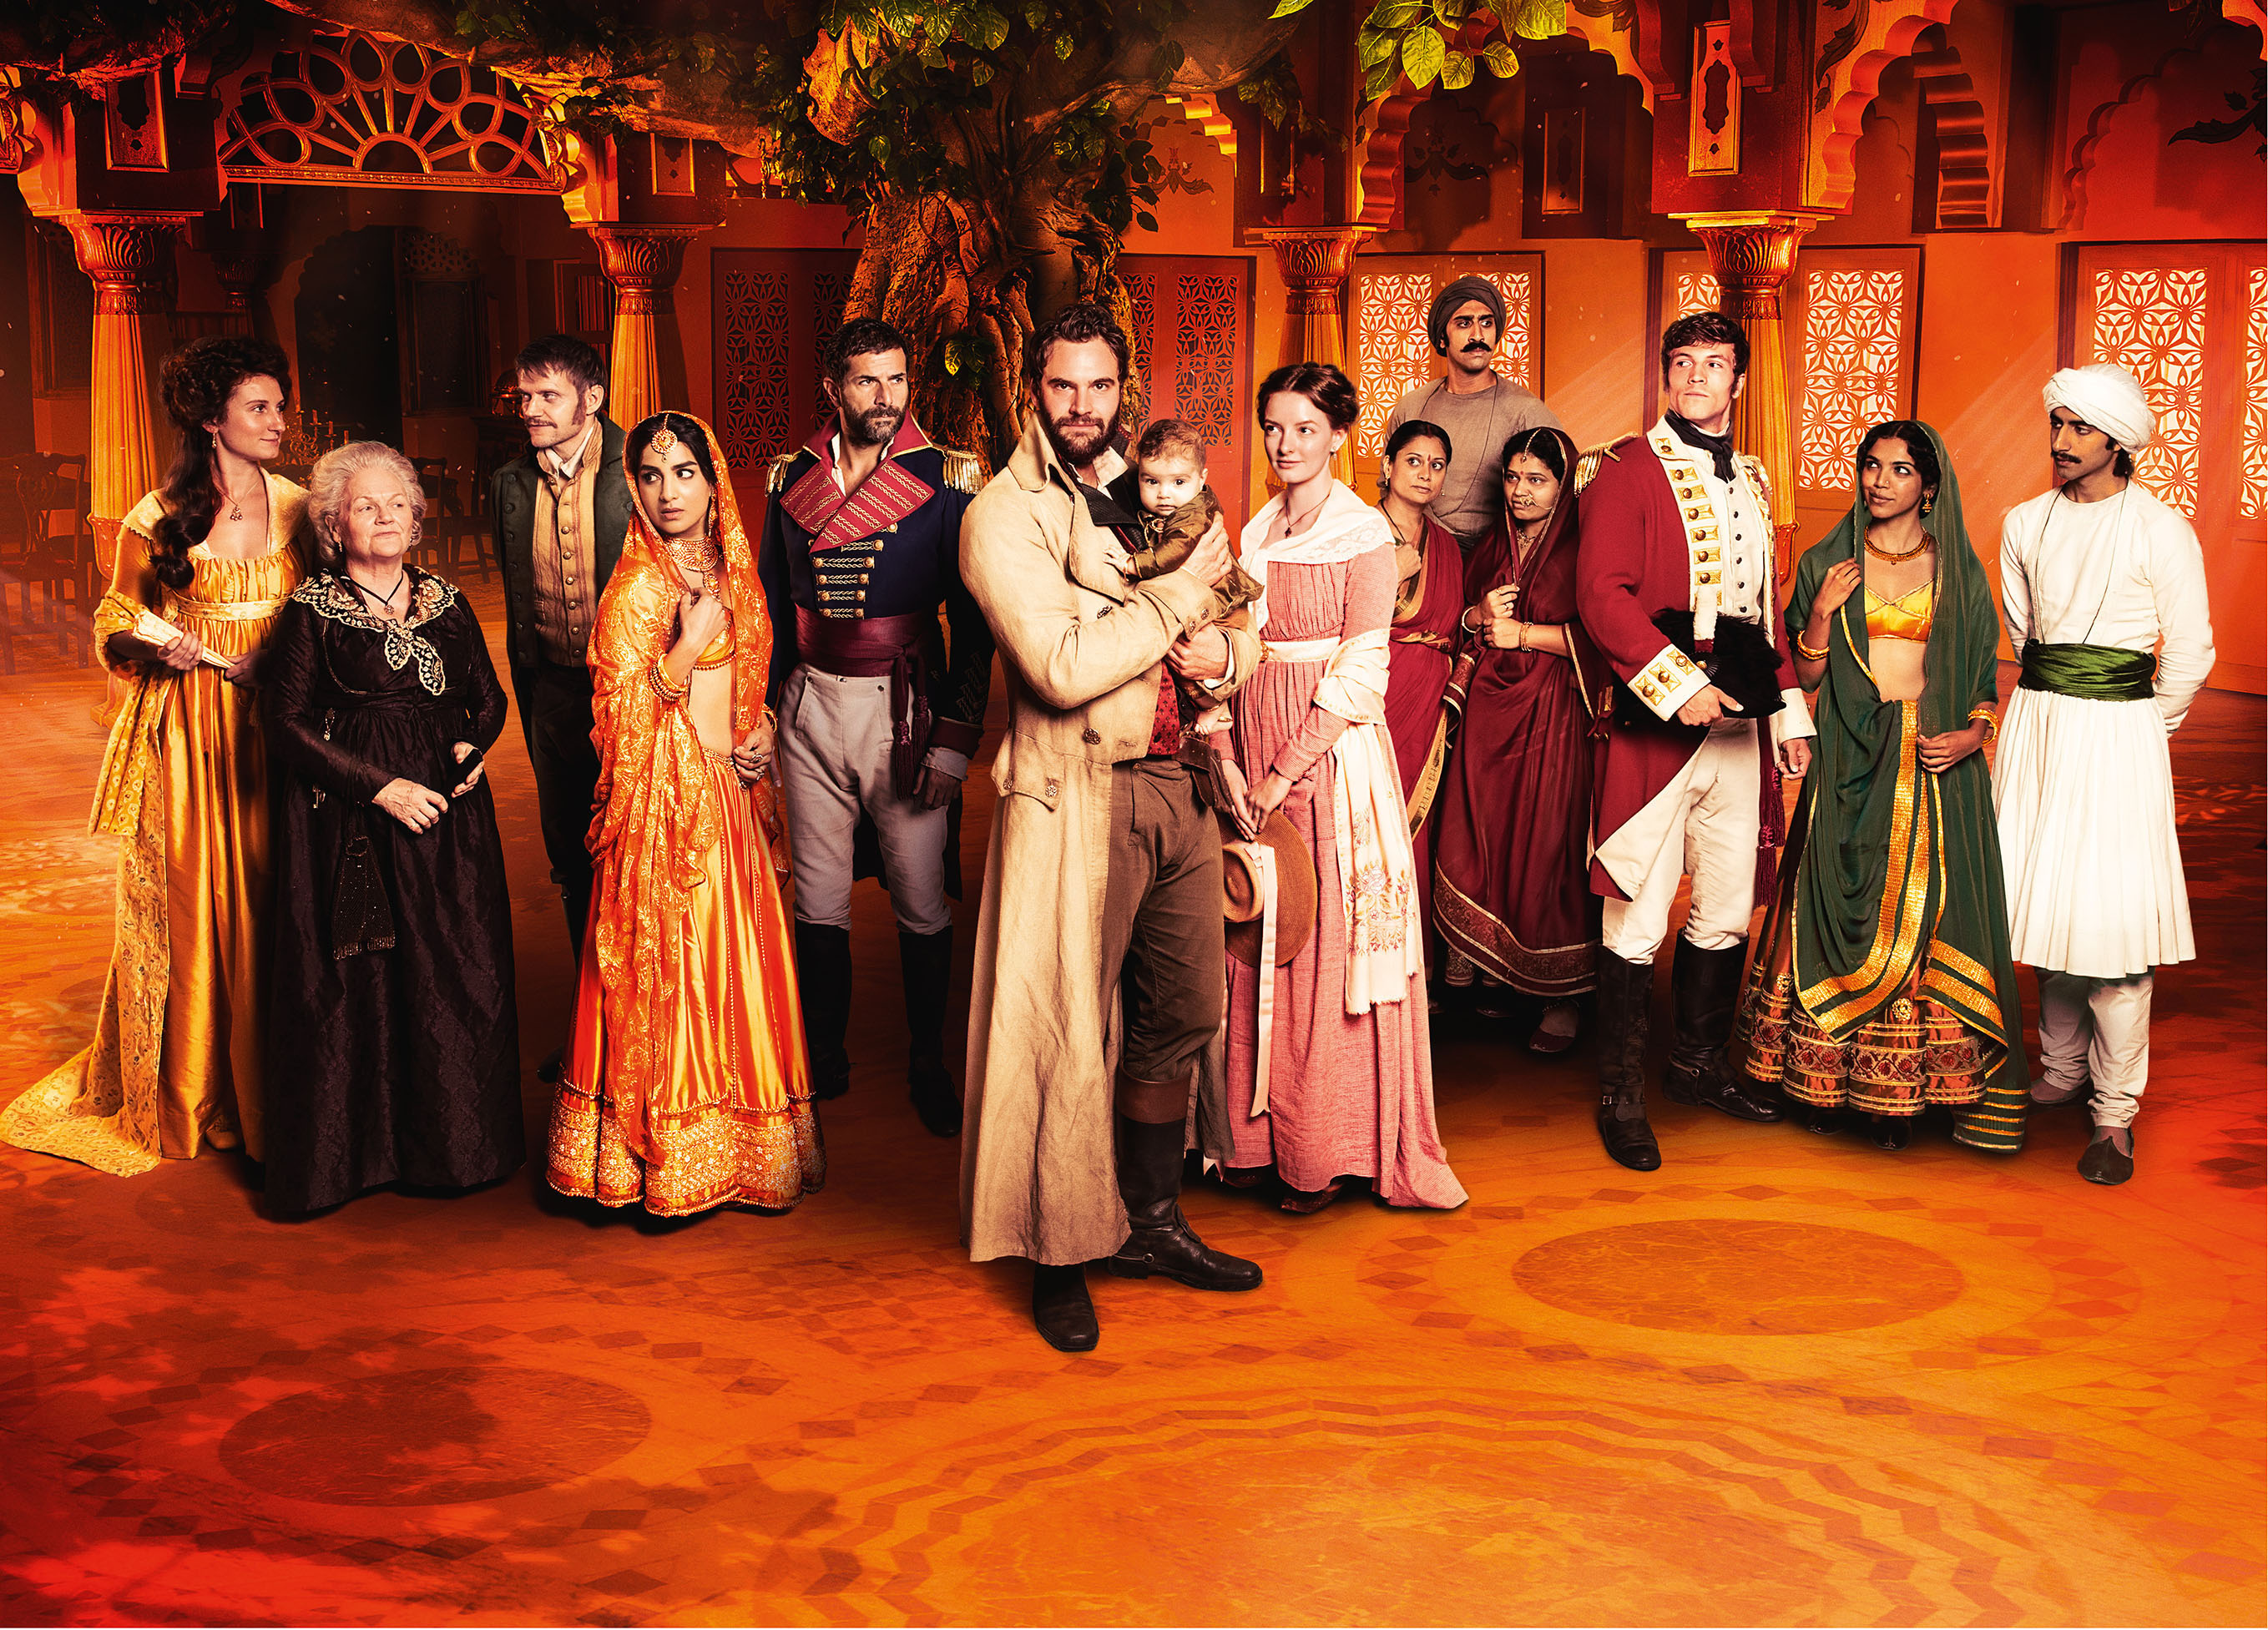 <p>"Beecham House" is a gorgeous six-part drama from Gurinder Chadha (who wrote and directed "Bend It Like Beckham" and "Bride and Prejudice") that debuted on PBS's "Masterpiece" in 2020. Set in the late 1700s, the lush series follows a principled and secretive British former soldier (the dashing Tom Bateman, who's known to some for his acting in "Murder on the Orient Express" and "Vanity Fair" and to others as actress Daisy Ridley's real-life husband) desperate to keep his family safe after moving into a stunning mansion in Delhi, India. The drama -- which has been favorably compared to "Downton Abbey" (and coincidentally co-stars Lesley Nicol, who played cook Mrs. Patmore on the older PBS show) -- follows his life as it intersects with all the gossip and intrigue swirling amongst the servants caring for his home and at the nearby palace. </p>